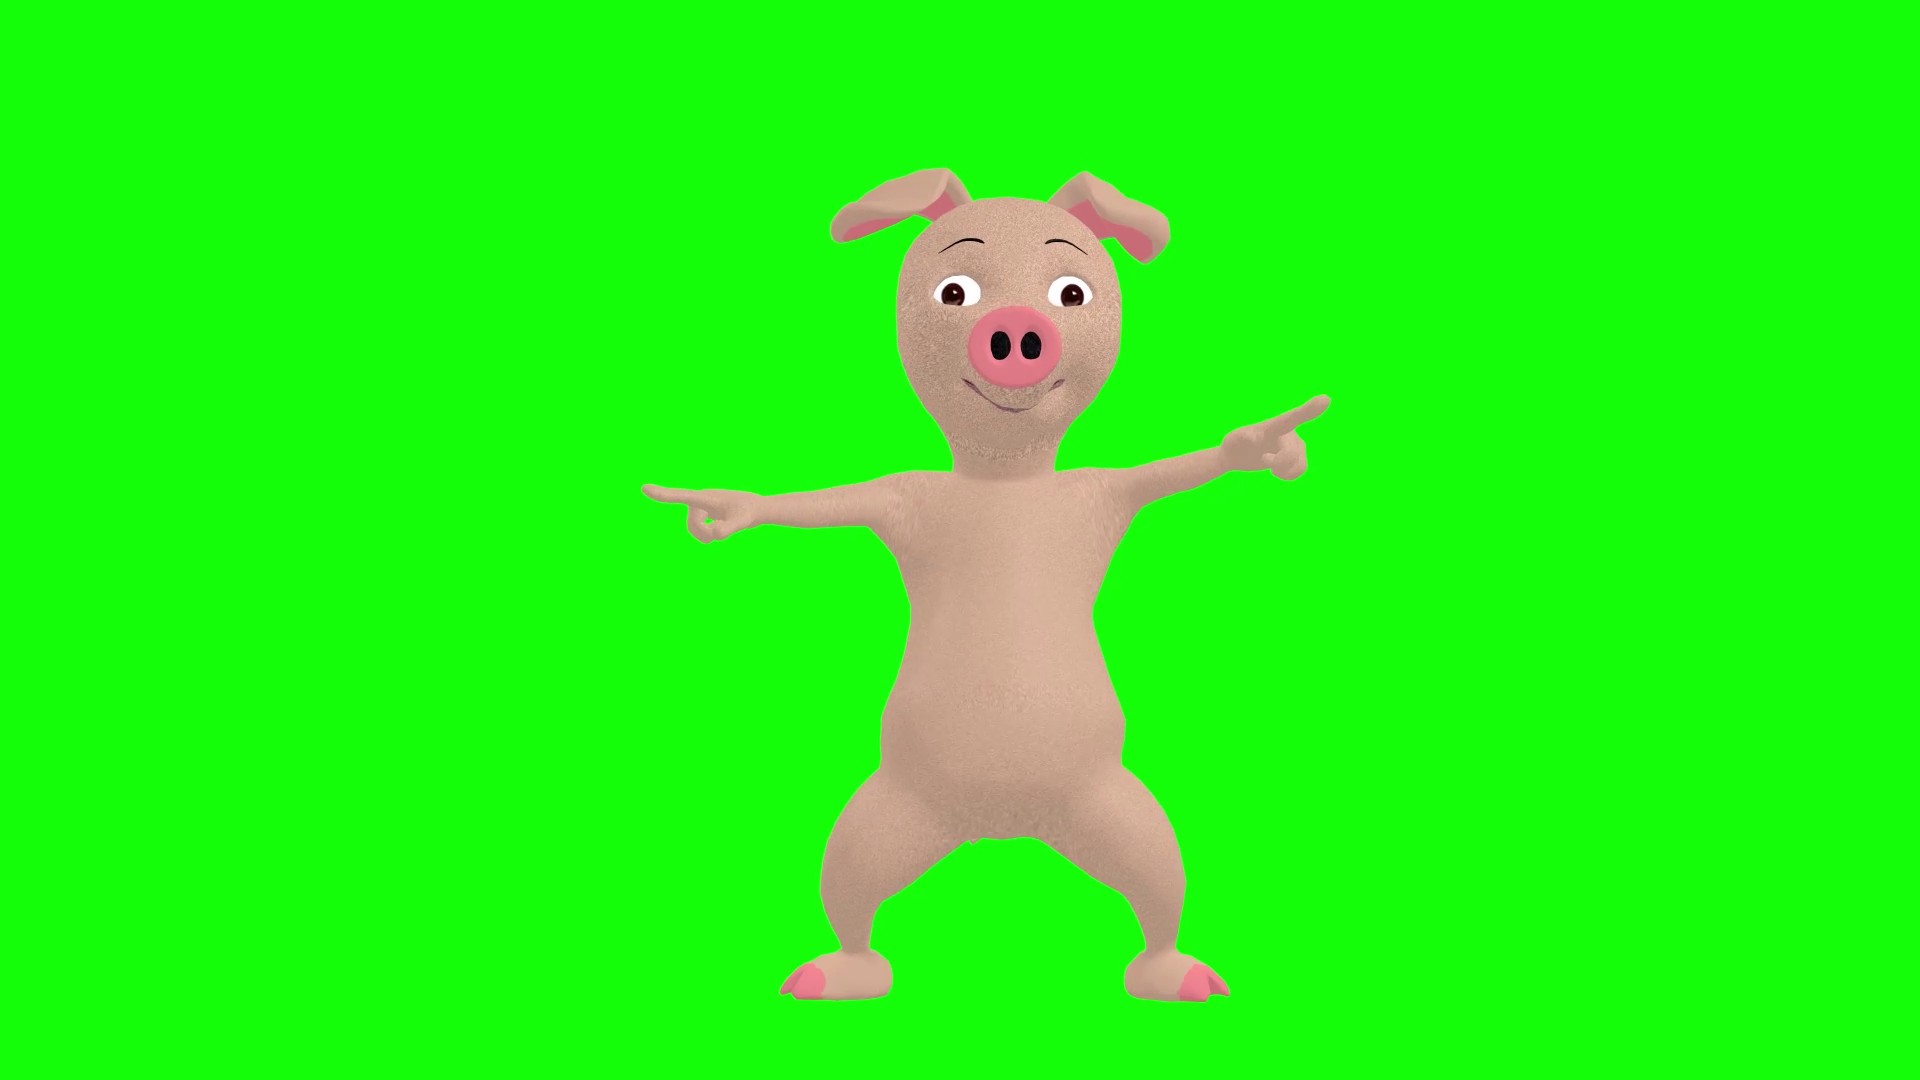 A video of a pig dancing funny